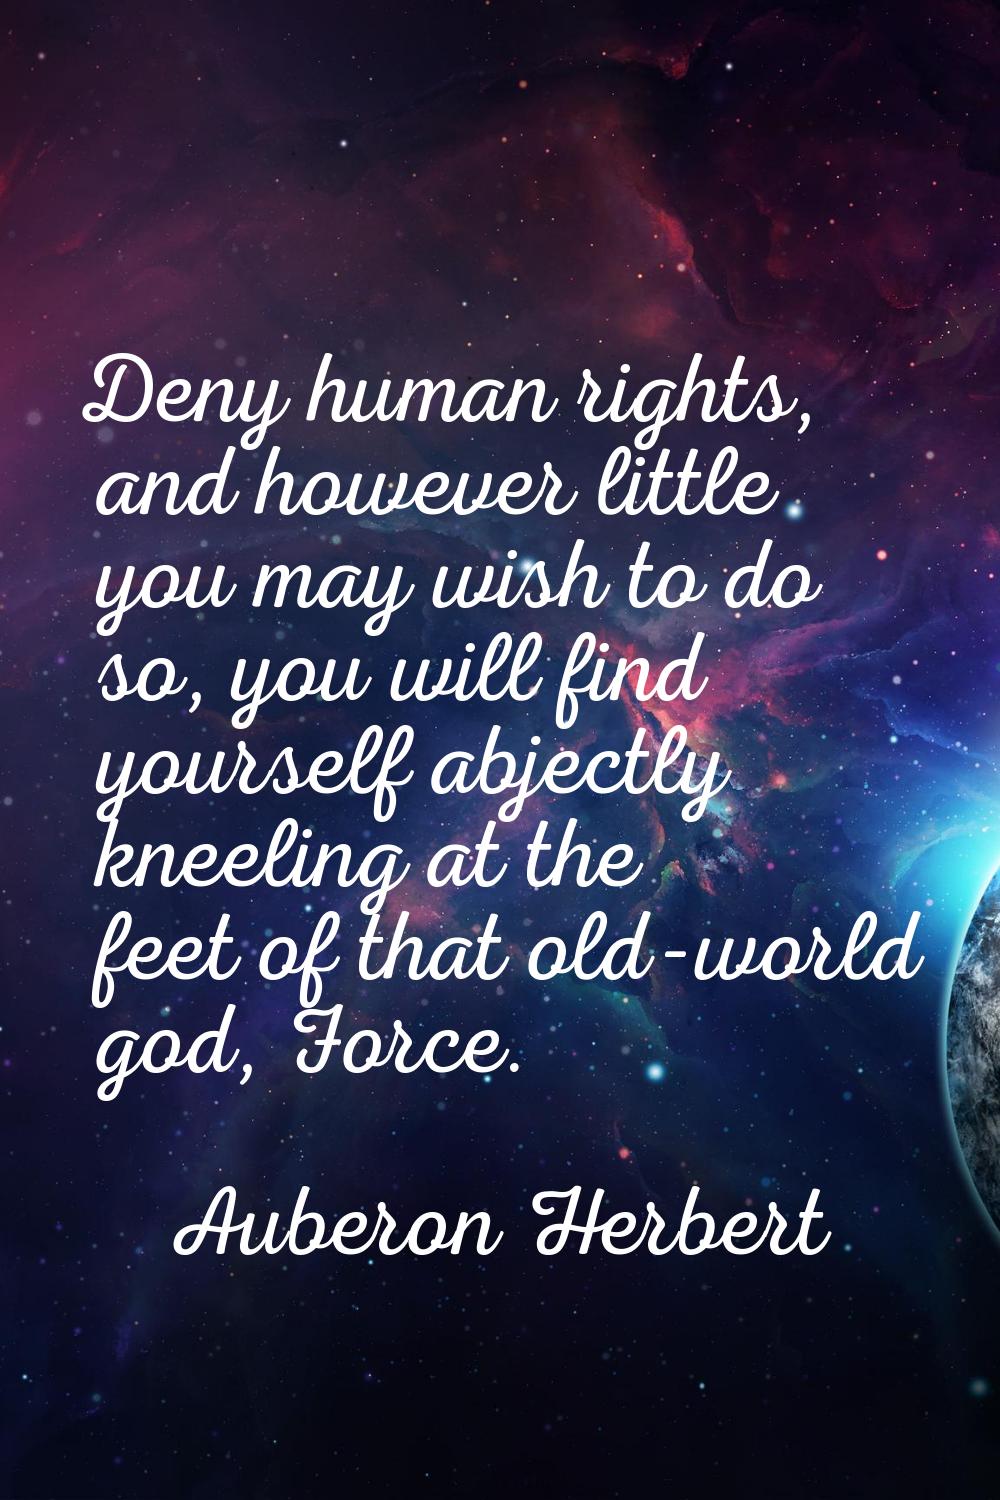 Deny human rights, and however little you may wish to do so, you will find yourself abjectly kneeli